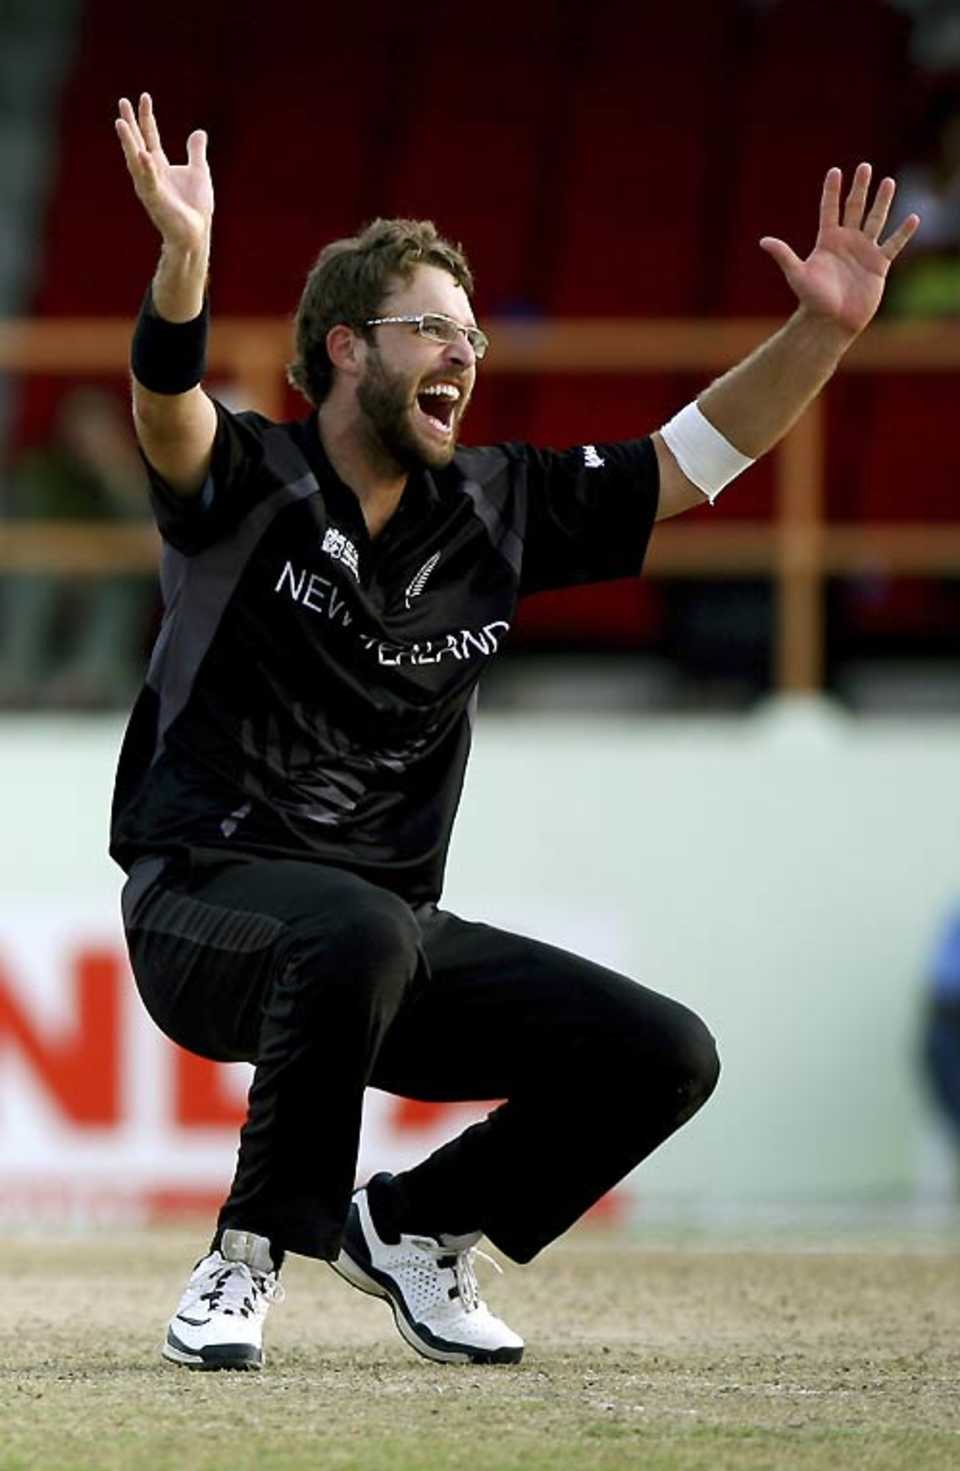 Daniel Vettori wins an appeal in his favour, Ireland v New Zealand, Super Eights, Guyana, April 9, 2007 